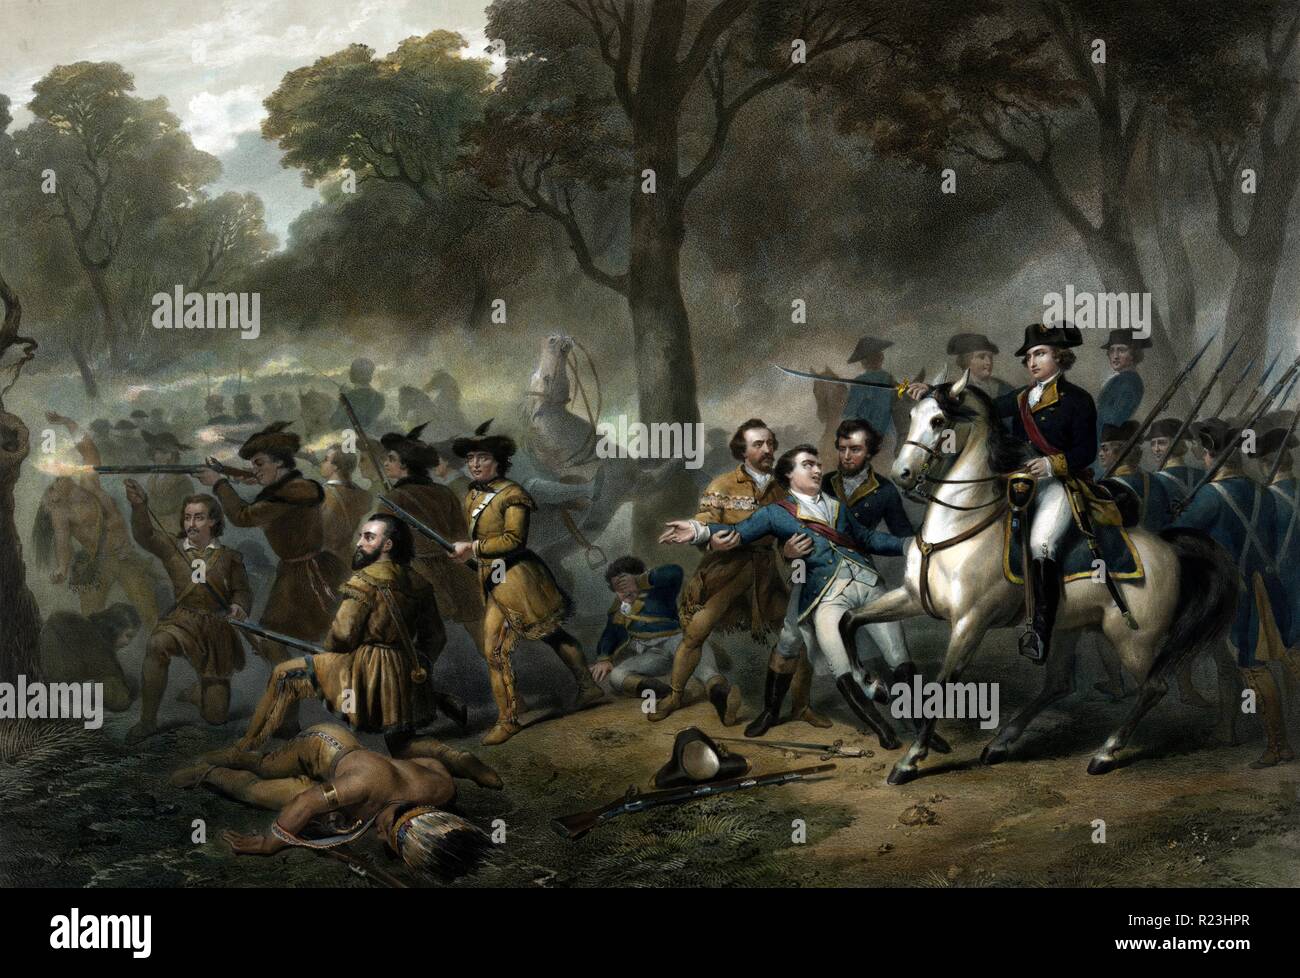 Life of George Washington - The Soldier. George Washington on horse, soldiers fighting during the battle of the Monongahela (July 9, 1755). c.1854 Stock Photo